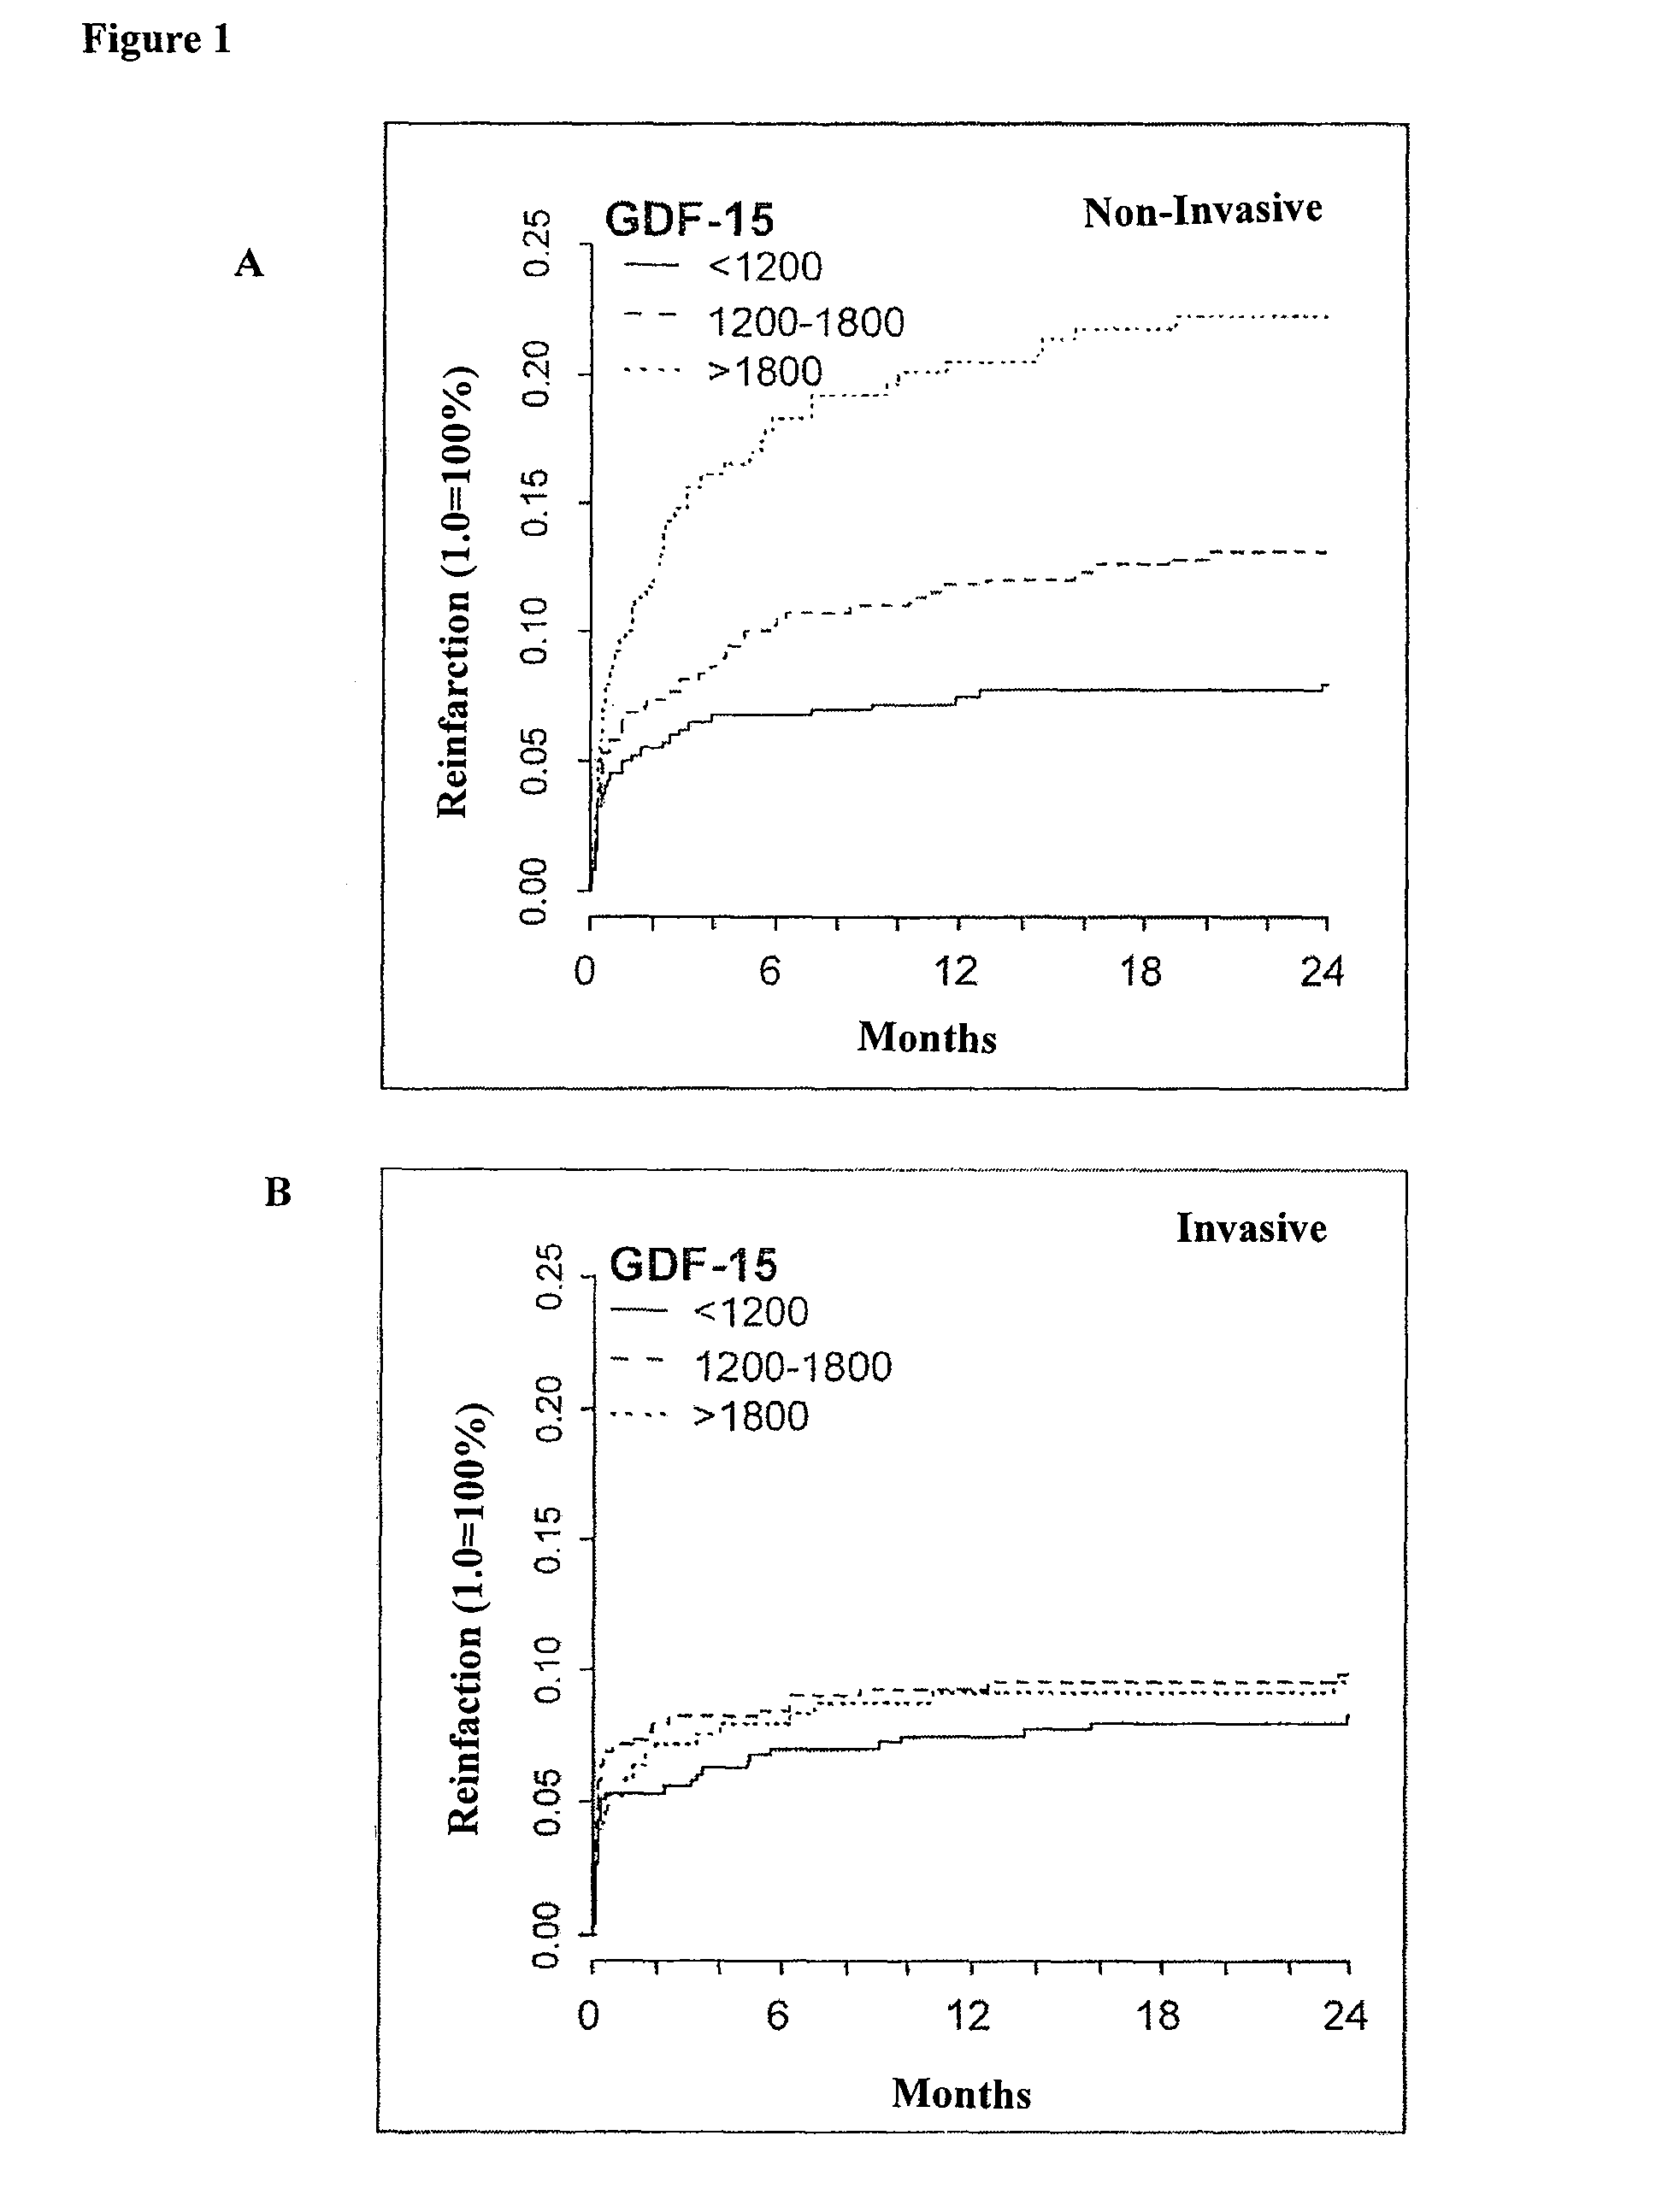 Assessing susceptibility to cardiac intervention, susceptibility to therapy for heart failure, risk of mortality or further cardiovascular events, and risk of subsequent pulmonary embolism in relevant patients based on determinations of GDF-15, natriuretic peptide, cardiac troponin or combinations thereof